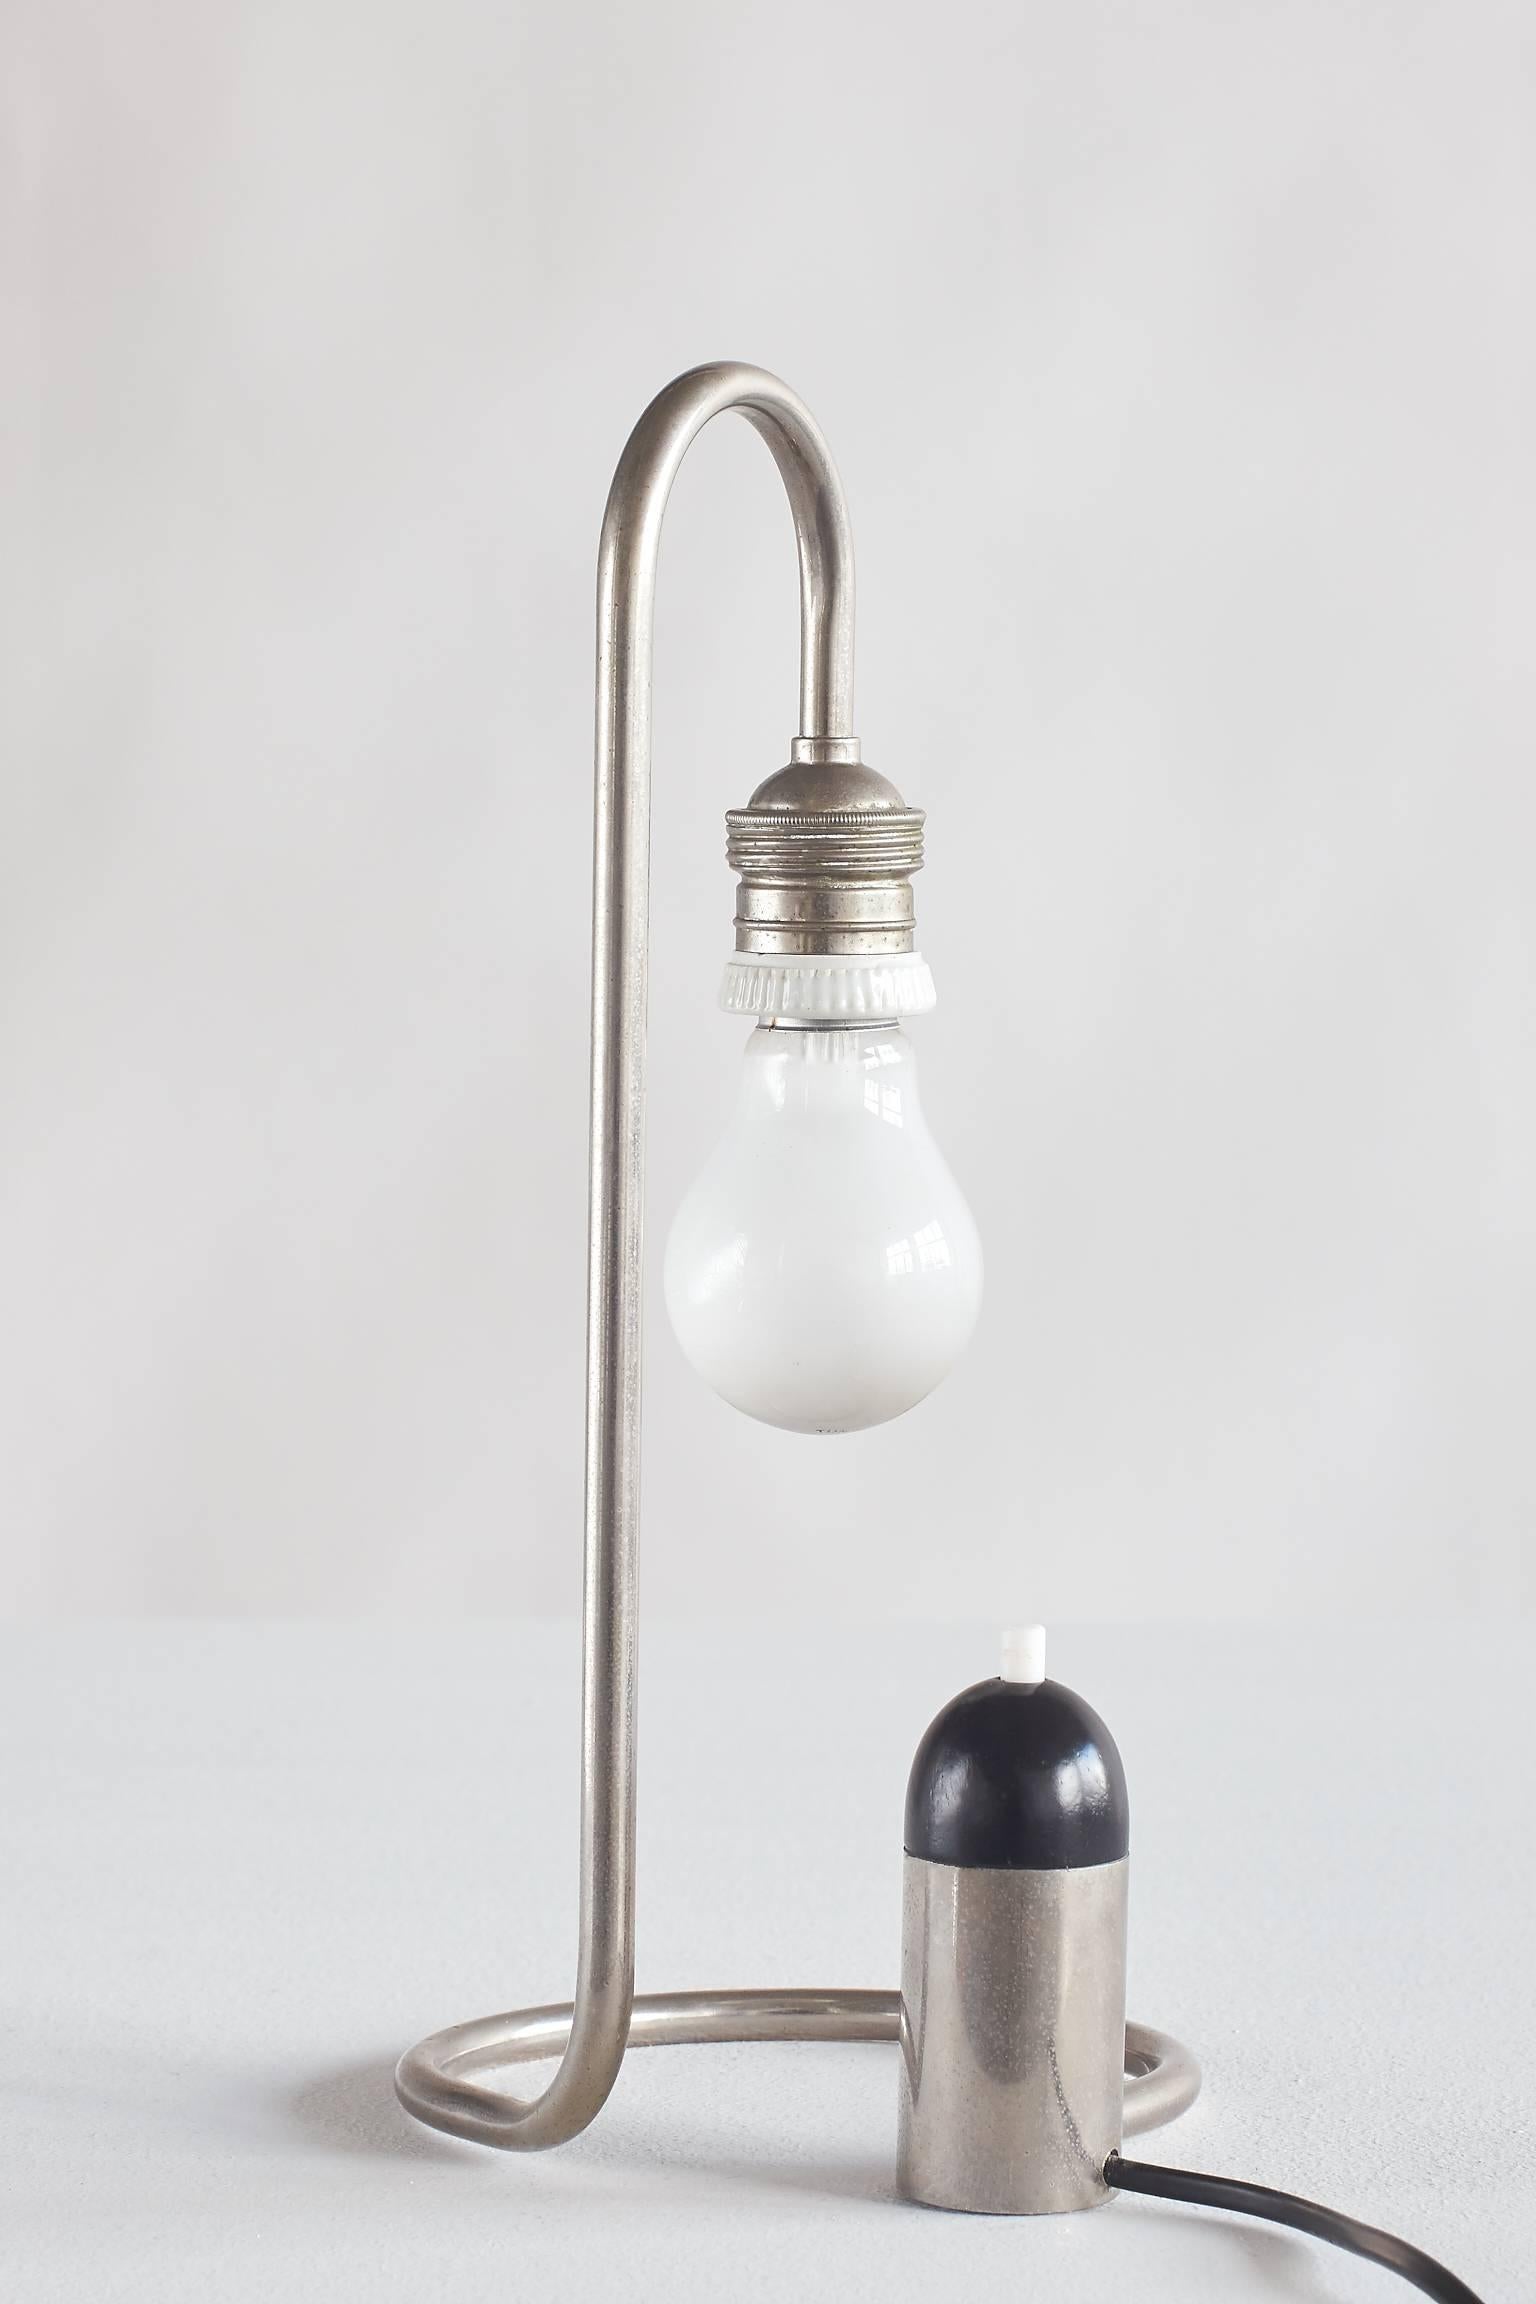 An important example of perfect simplicity, this lamp was designed by Sybold van Ravesteyn in 1926. Made of chrome-plated steel, this particular lamp is one of the rare 50 pieces van Ravesteyn allowed to be re-issued in 1979 by the small-scale